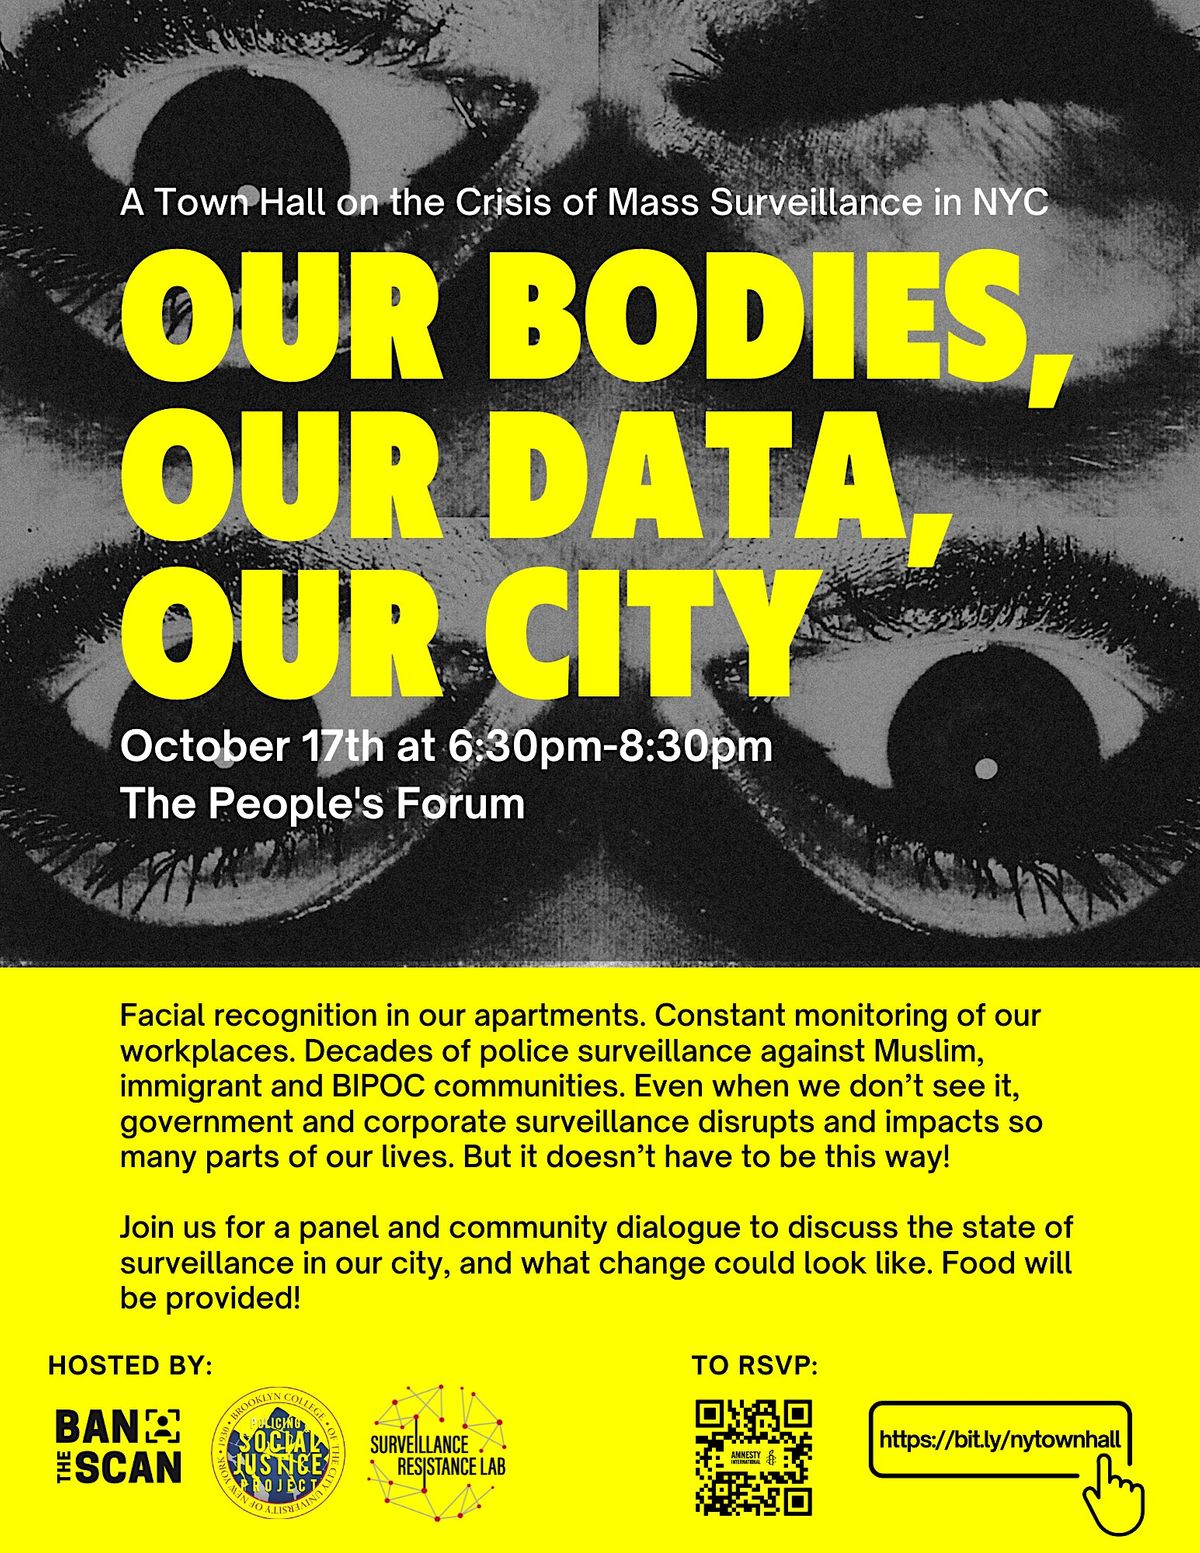 Our Bodies, Our Data, Our City: A Town Hall on Mass Surveillance in NYC